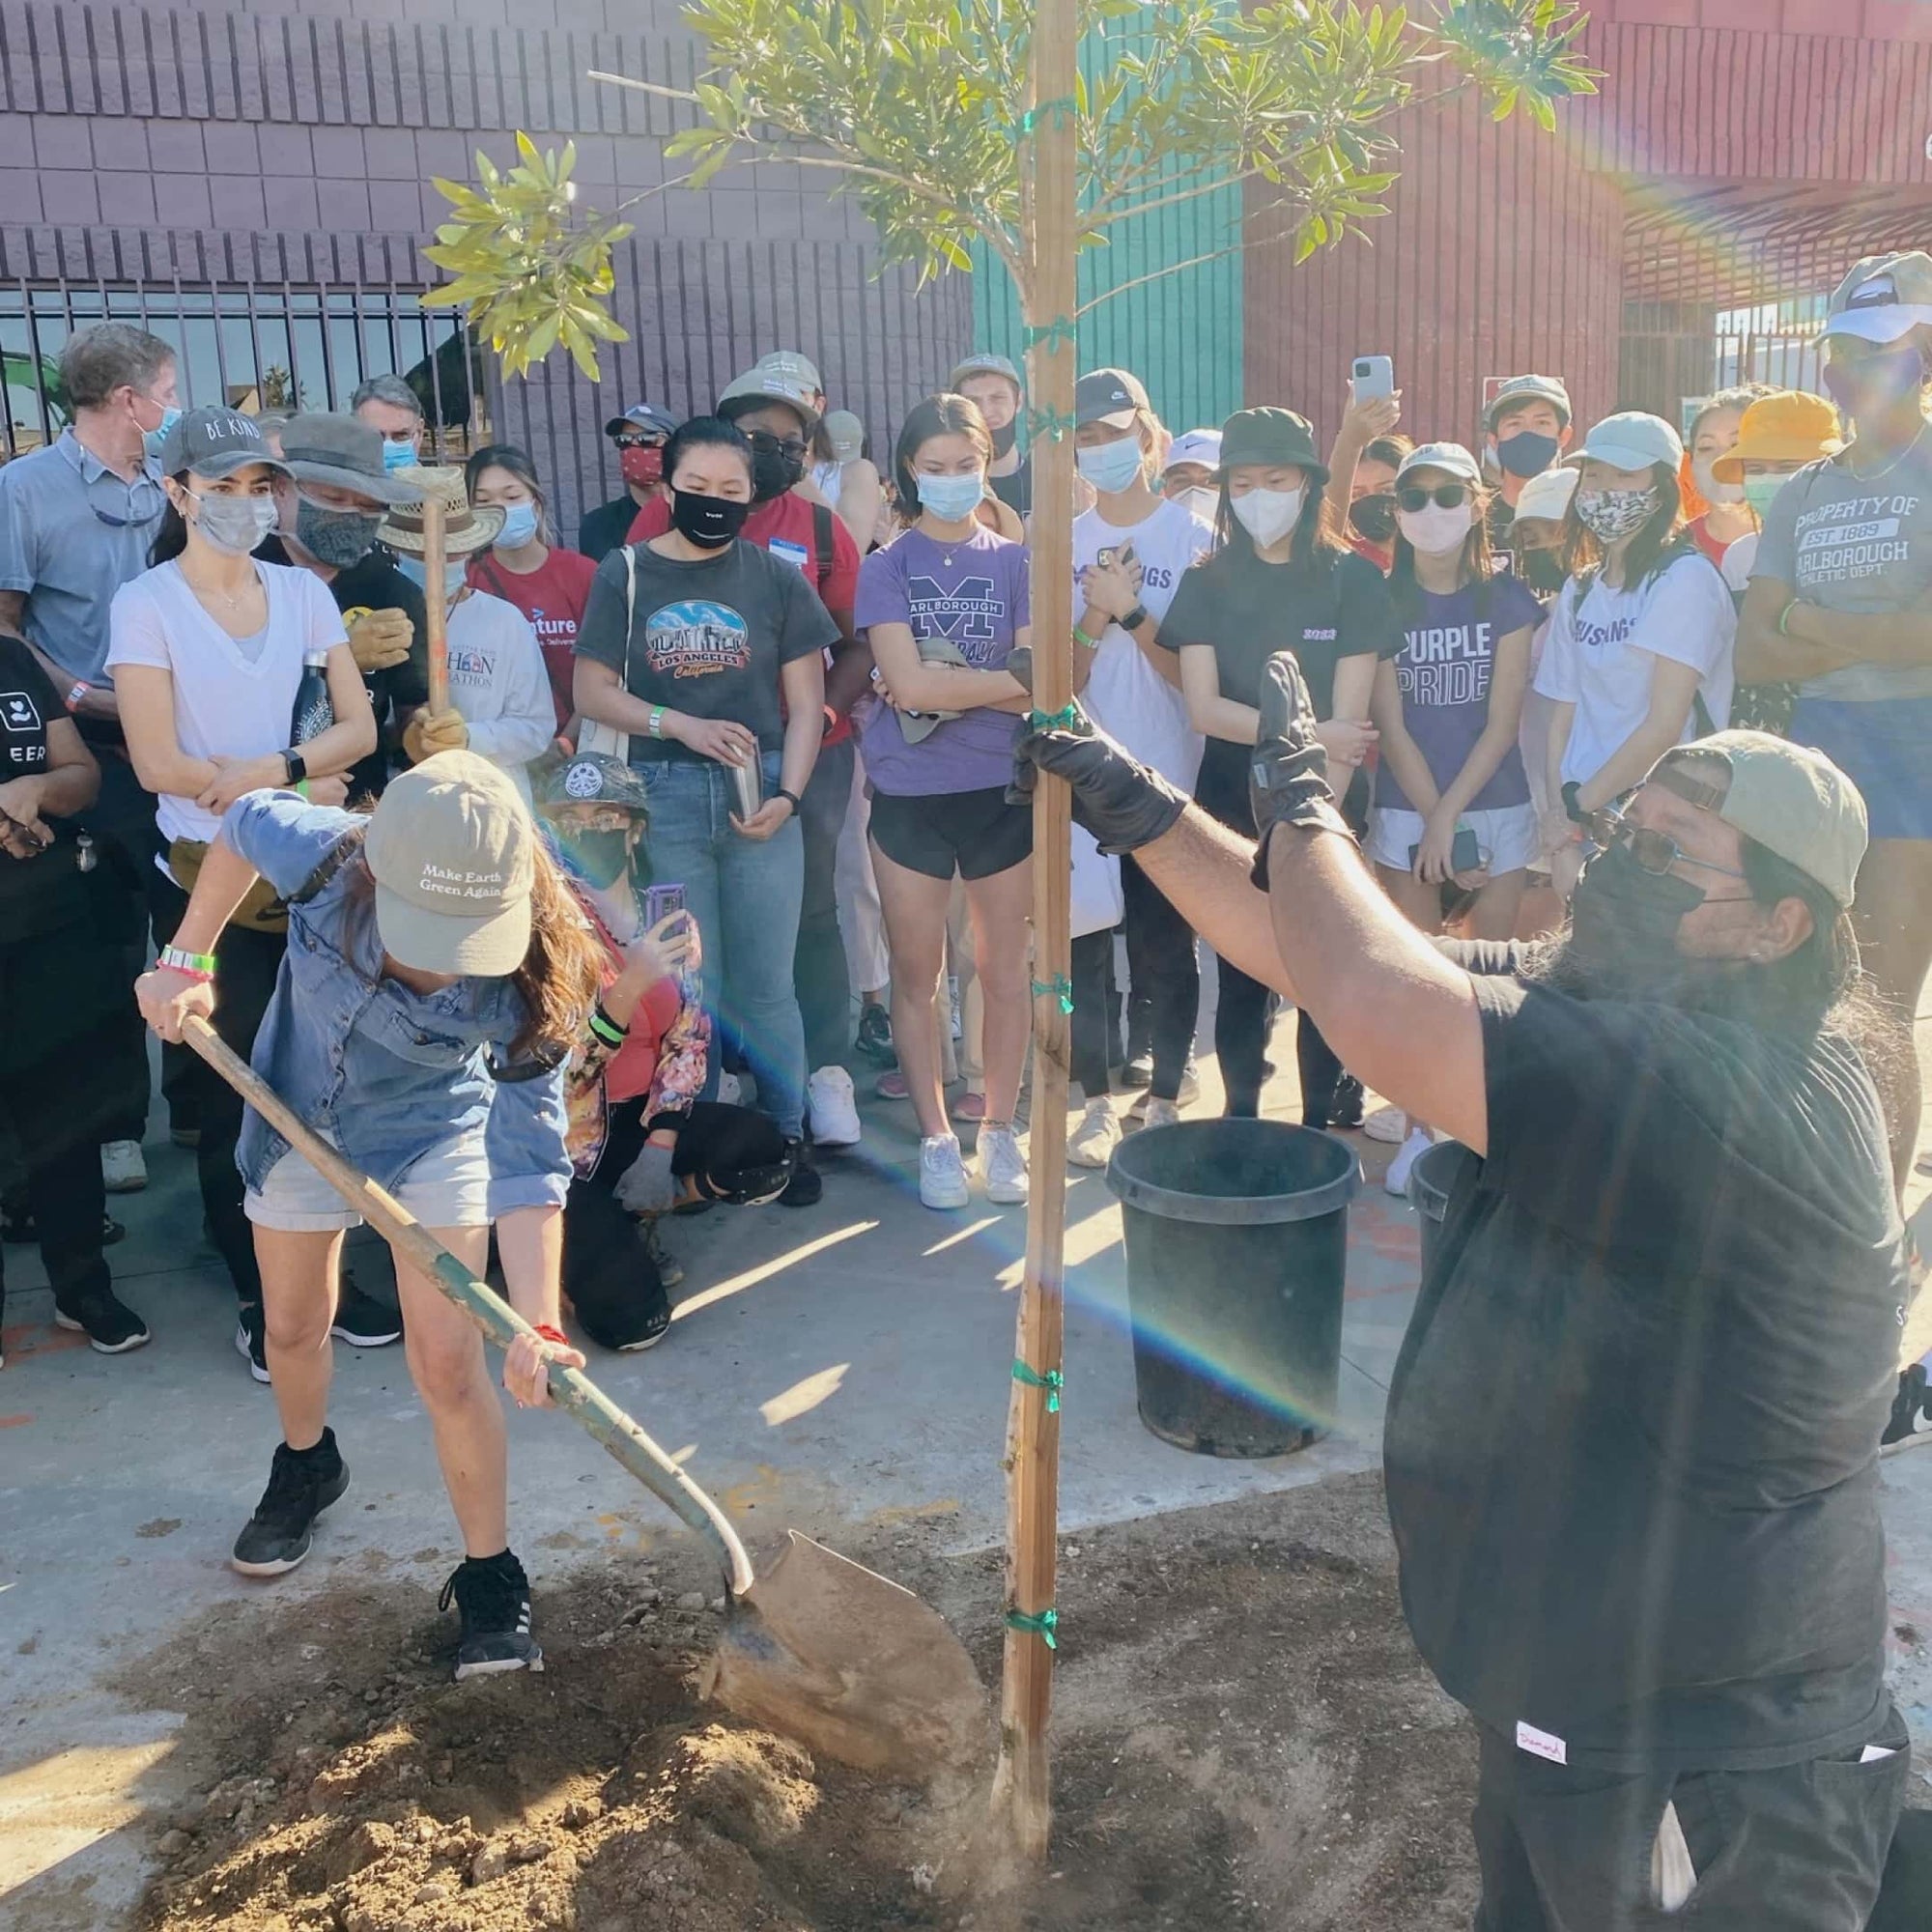 A group of people planting trees next to a side-walk in LA